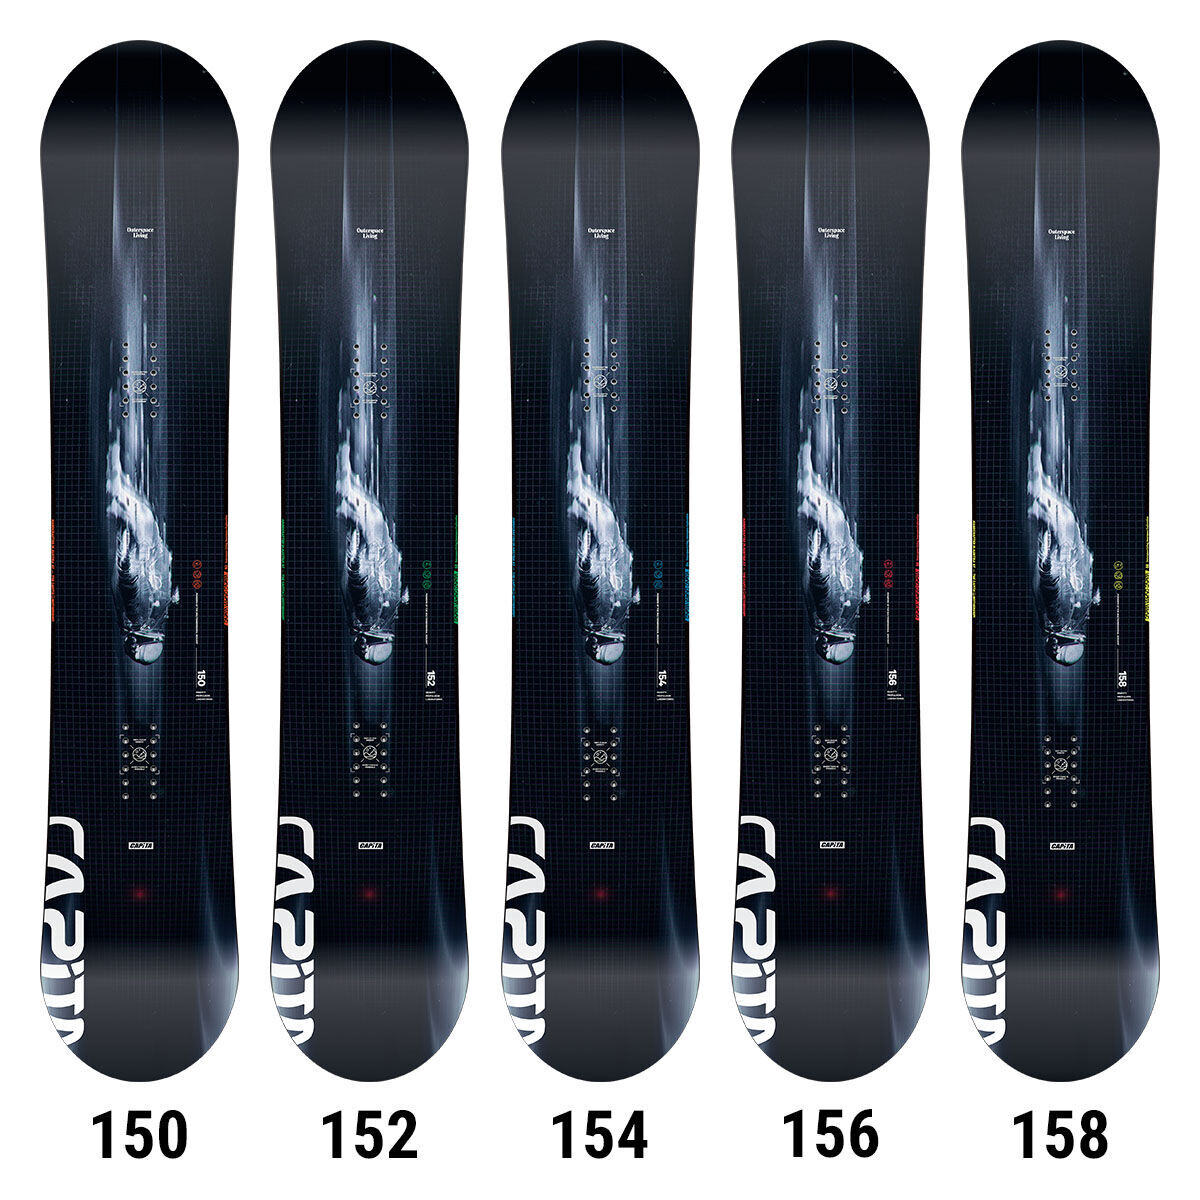 CAPiTA Outerspace Living Snowboard Mens | Christy Sports